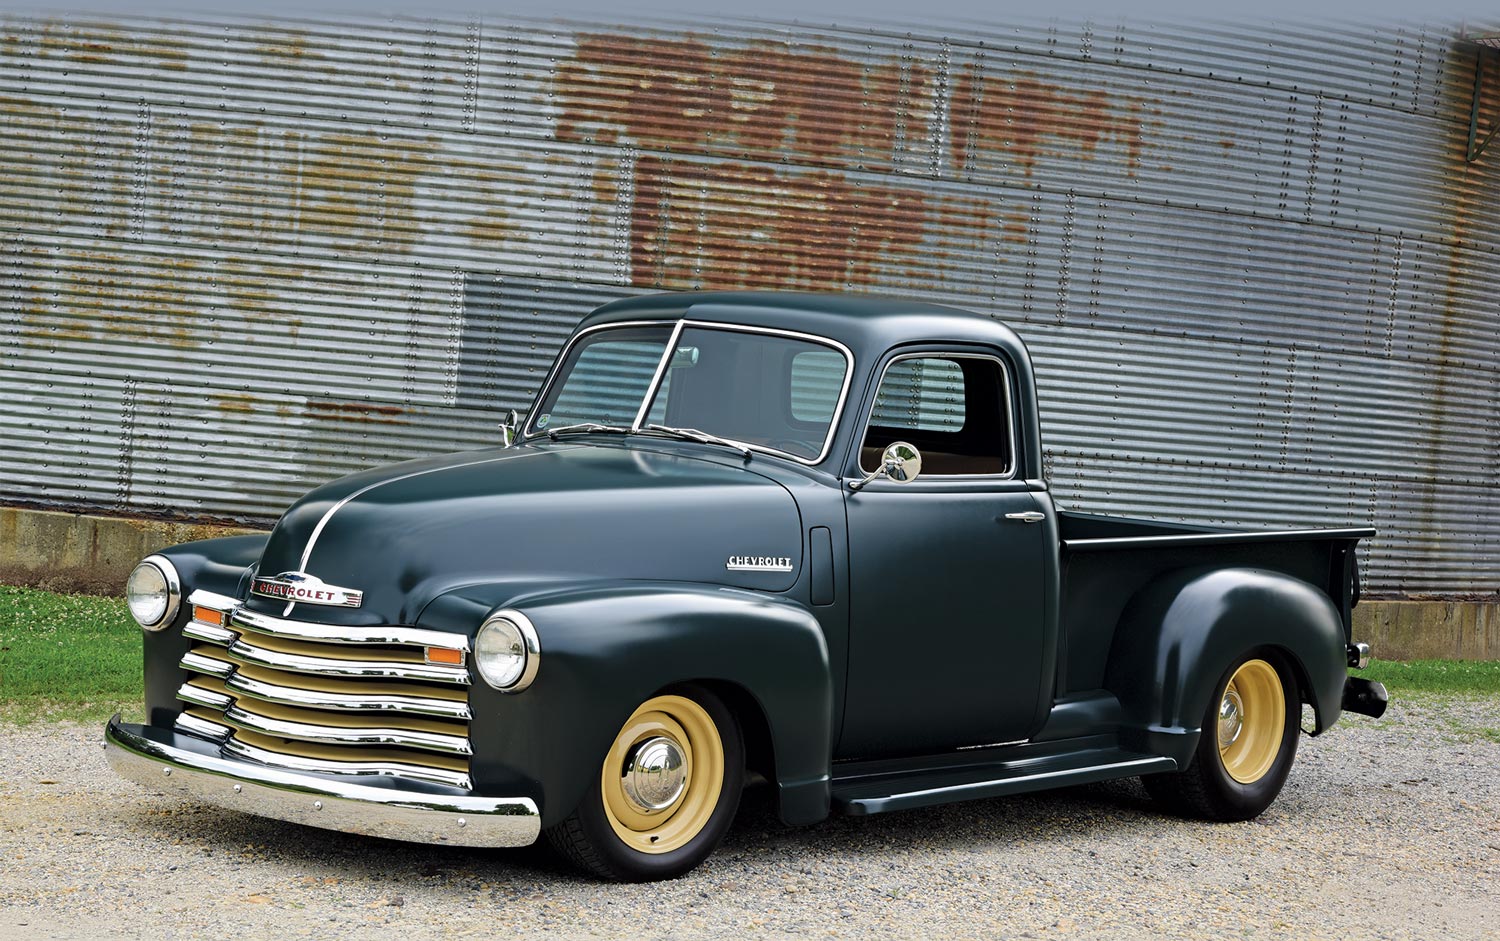 ’49 Chevy Hauler's front side view